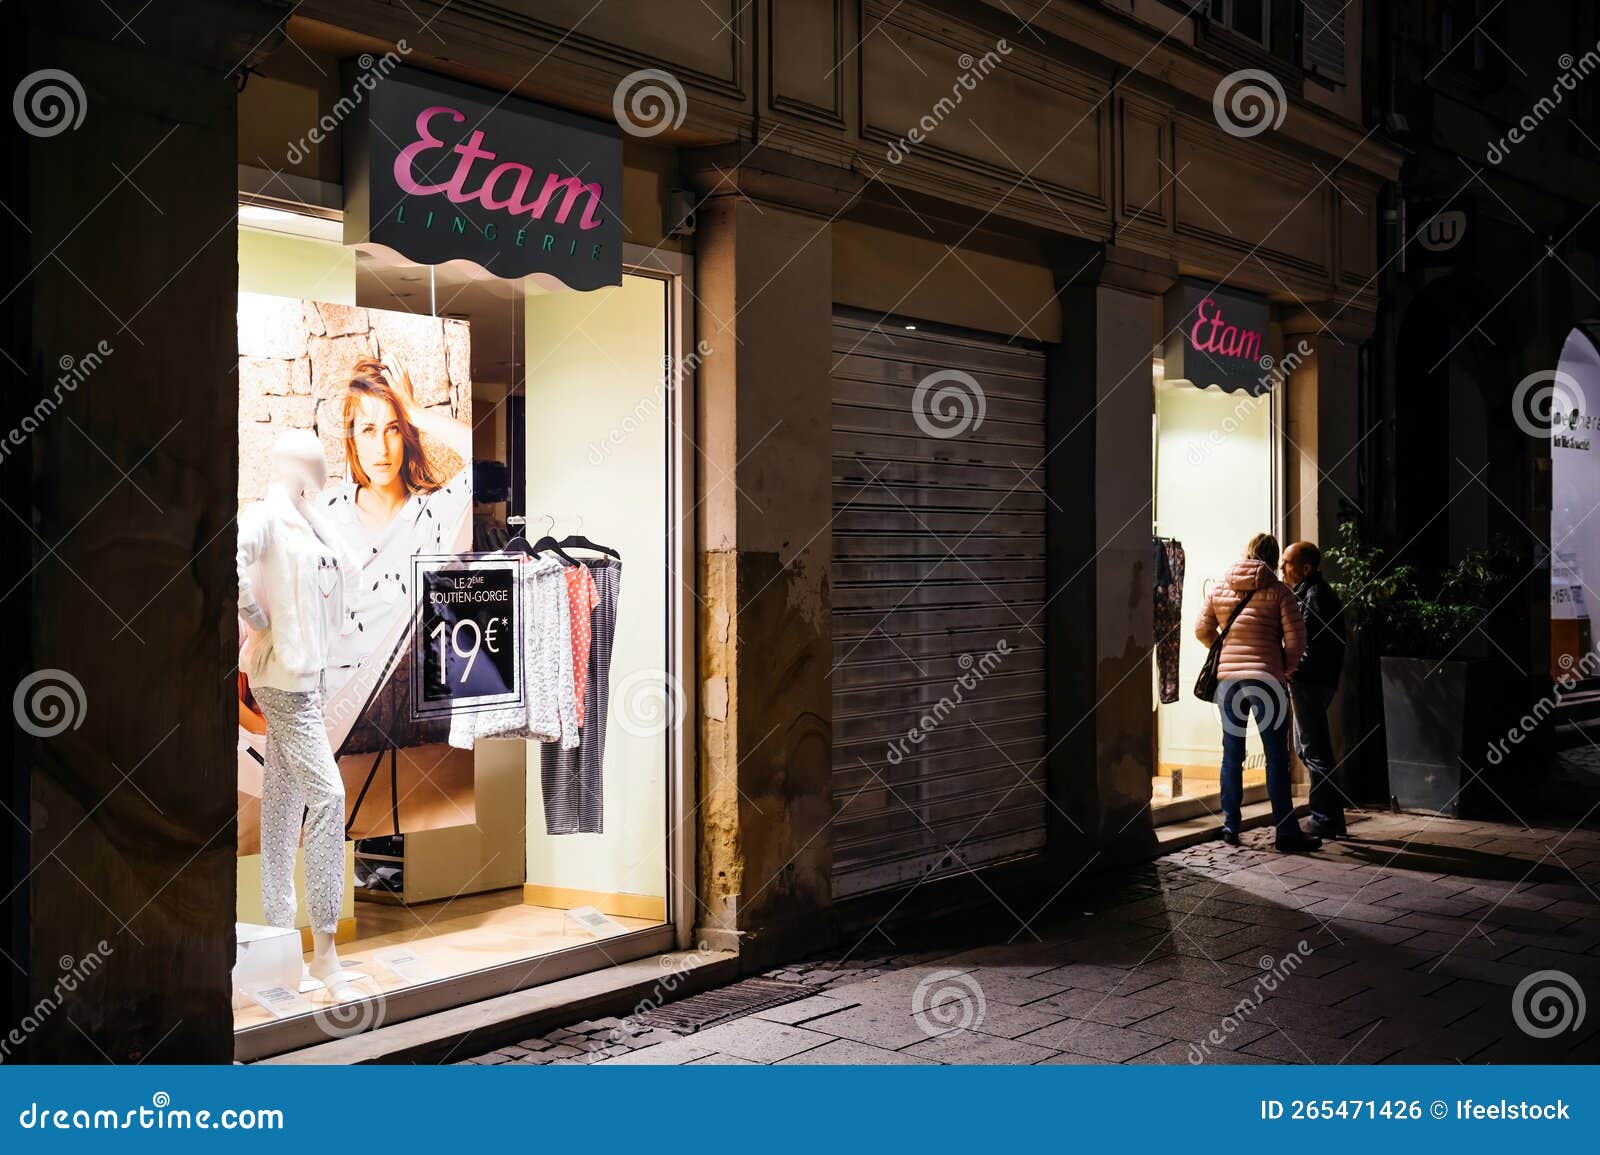 Etam French Lingerie Store at Night with Couple Looking at the Showcase ...